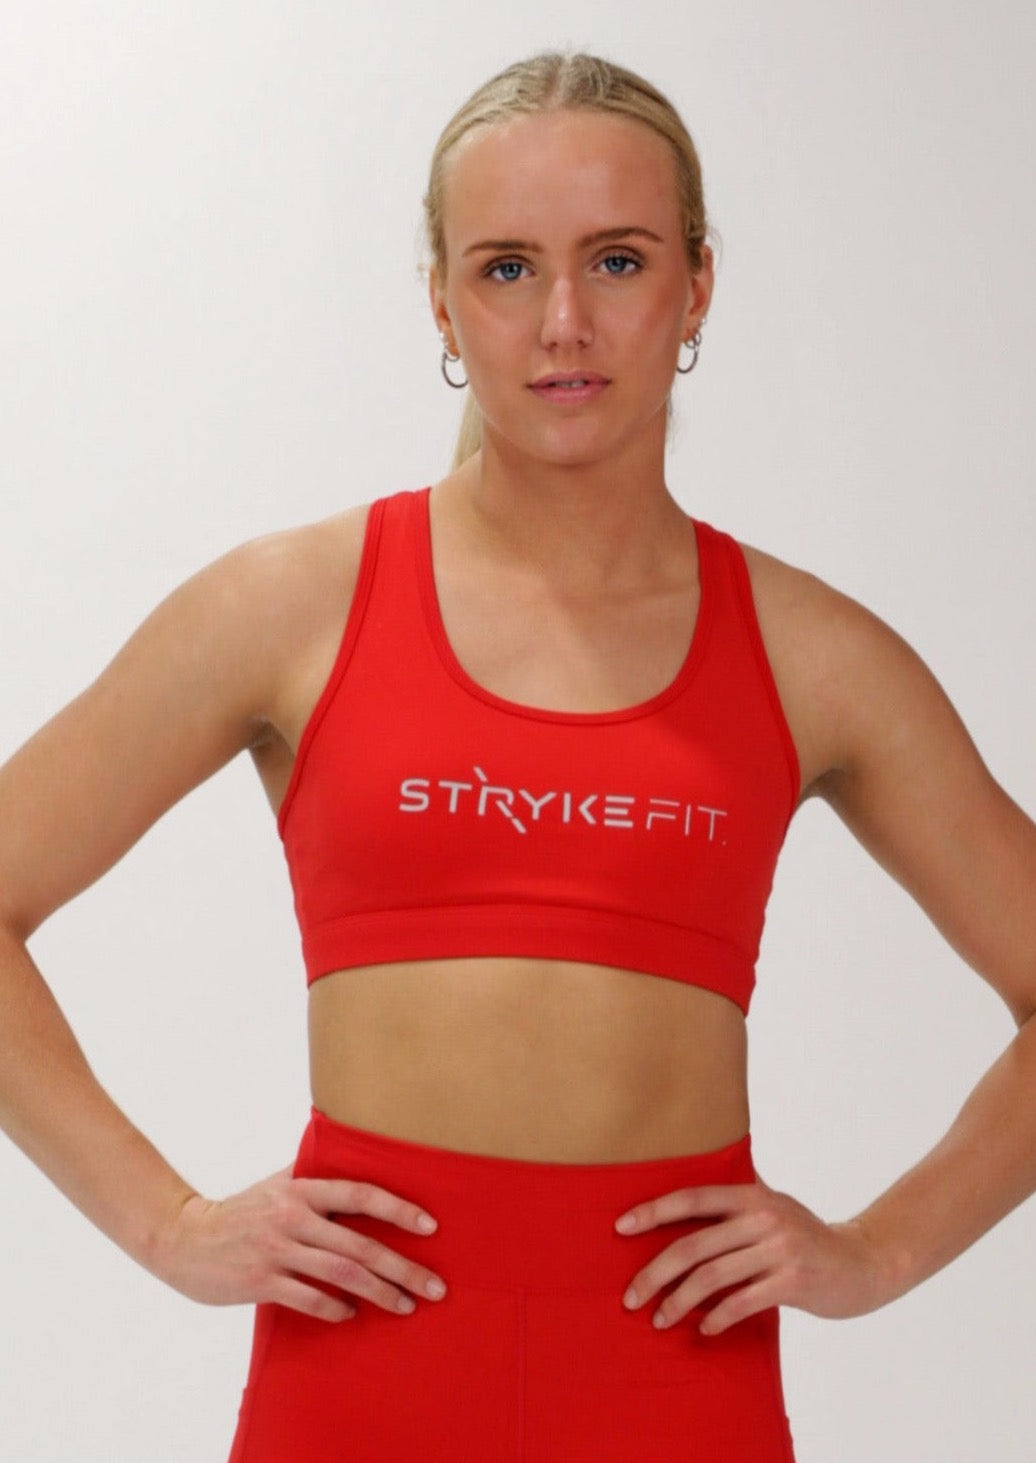 The STRYKE CROP TOP is designed with a back phone pocket enabling you to store your phone effortlessly while wearing, allowing you to listen to music, podcasts, or even just having your phone with you for personal security. The racerback straps follow the curve of your shoulder blades to allow your arms to move freely while offering maximum support. Best running crop top.